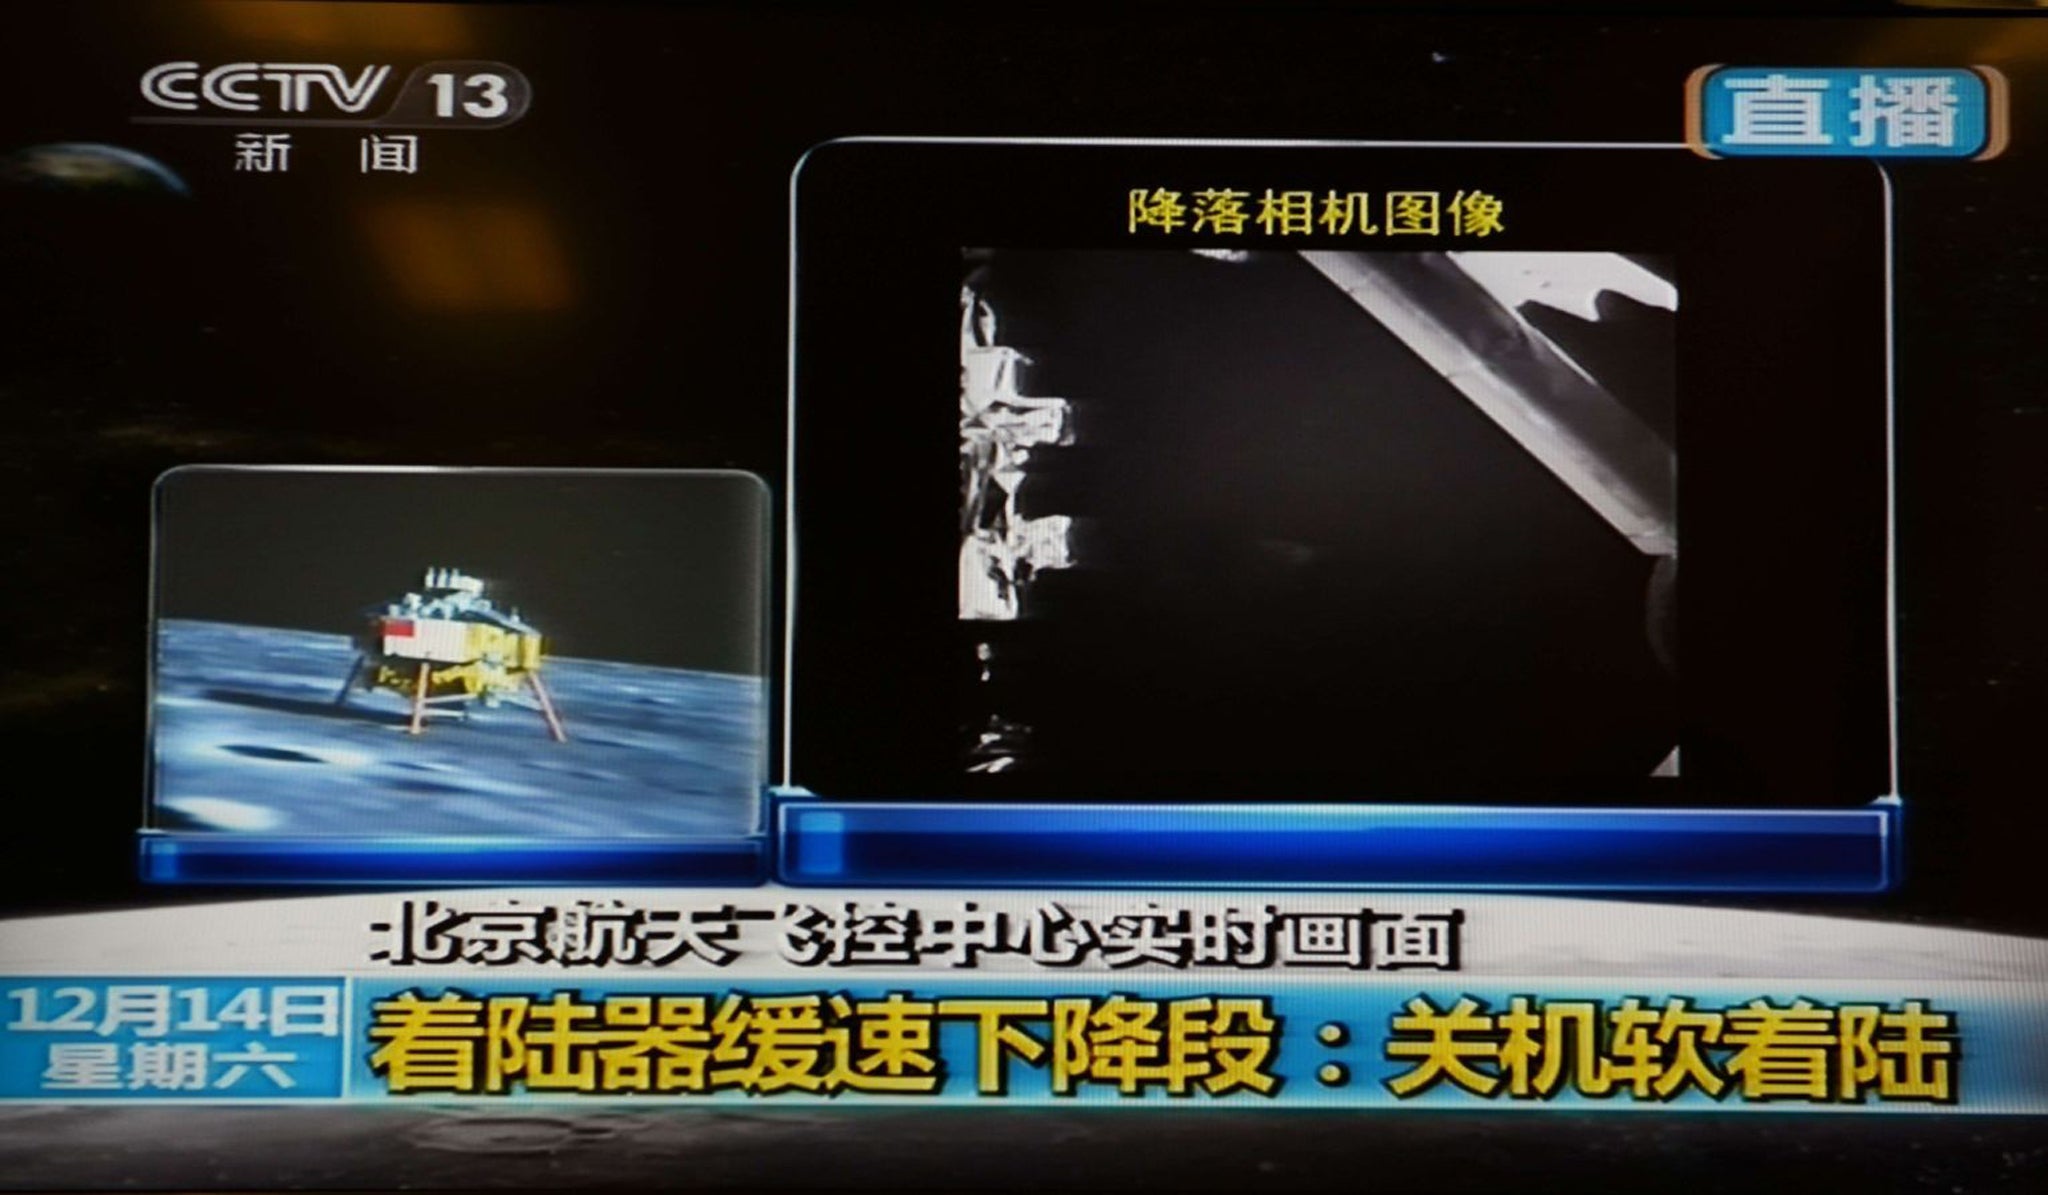 CCTV live broadcasting footage shows an image (right) of China's first lunar rover transmitted back to the control centre in Beijing after it landed on the moon